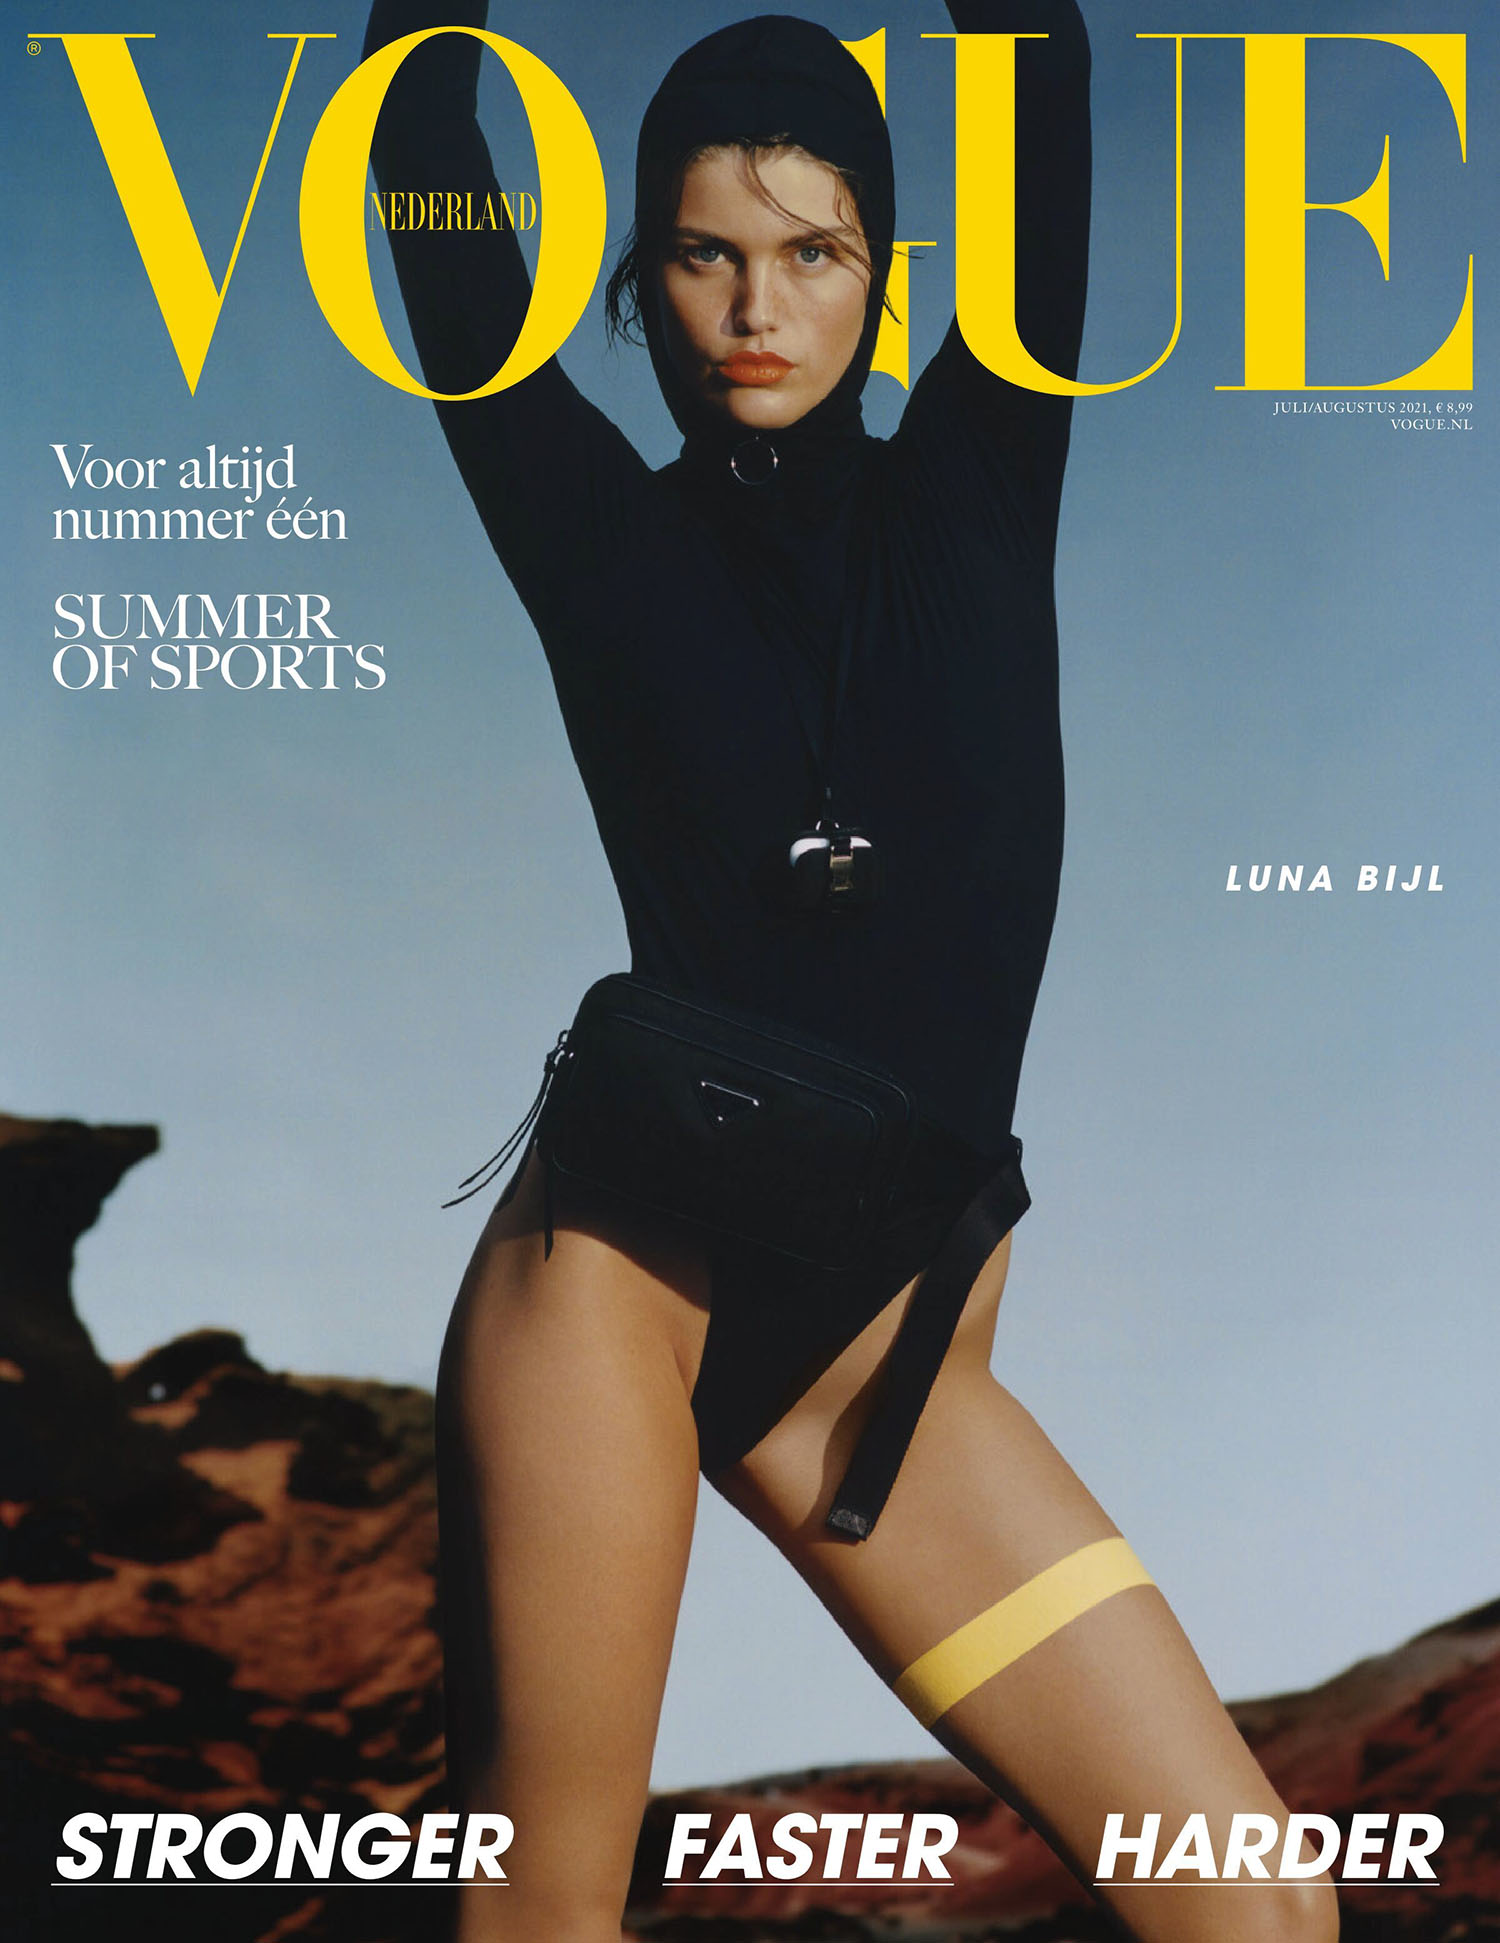 Luna Bijl covers Vogue Netherlands July/August 2021 by Charles